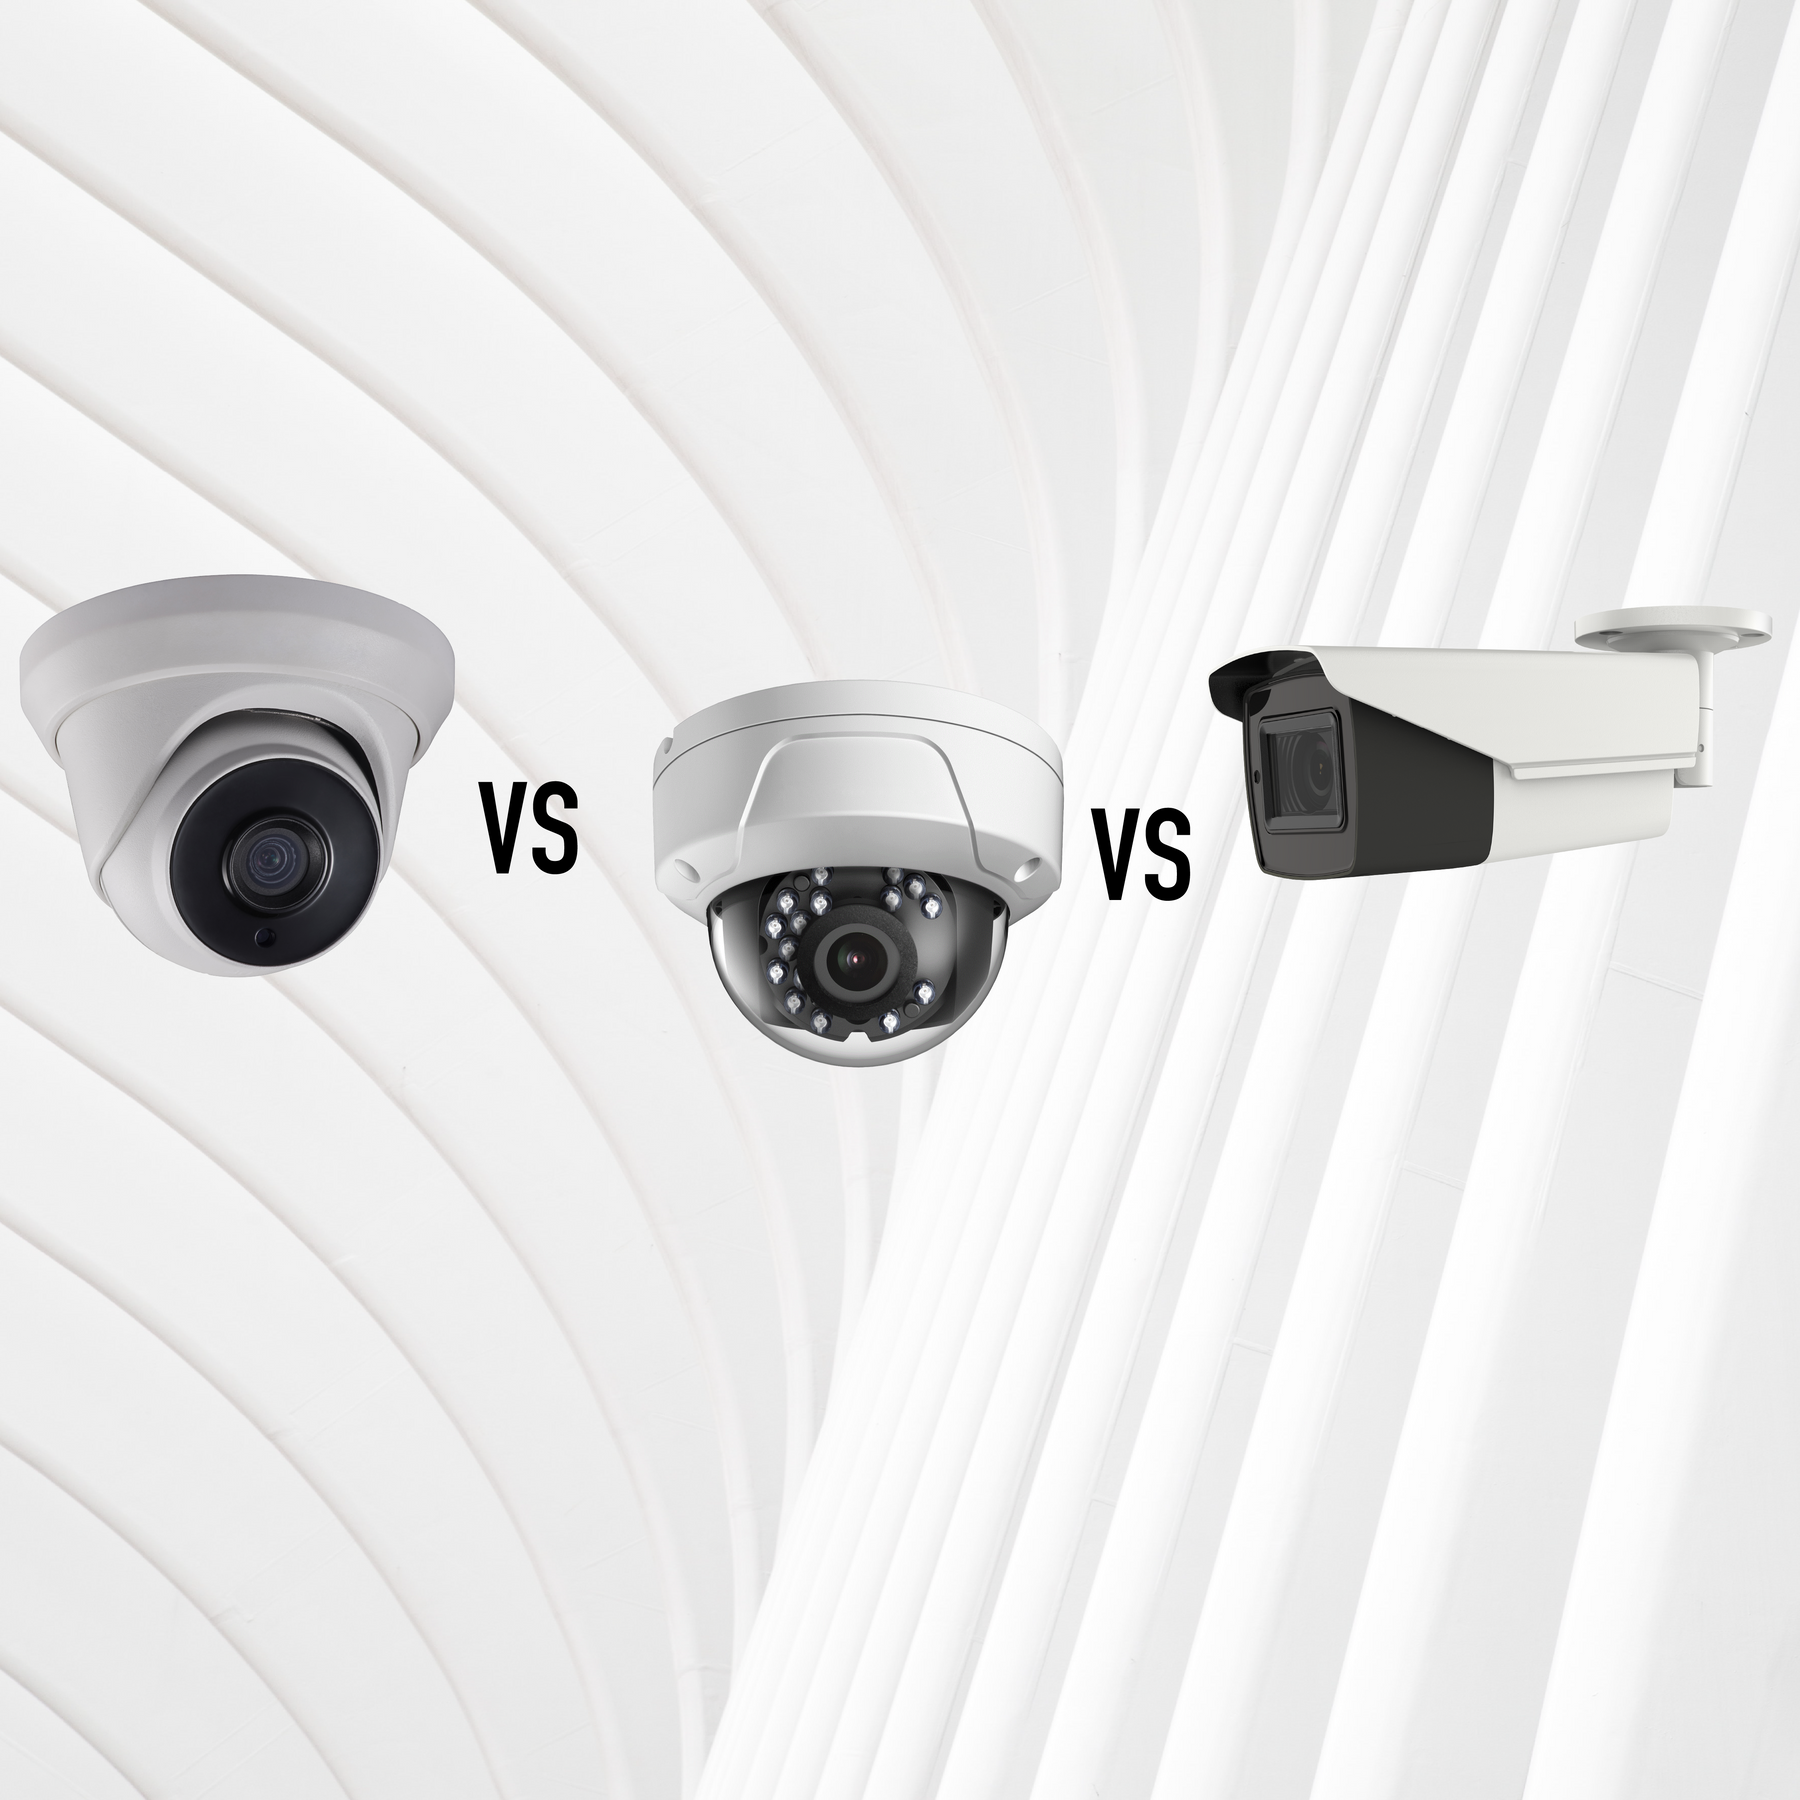 comparing Dome, Turret, and Bullet cameras